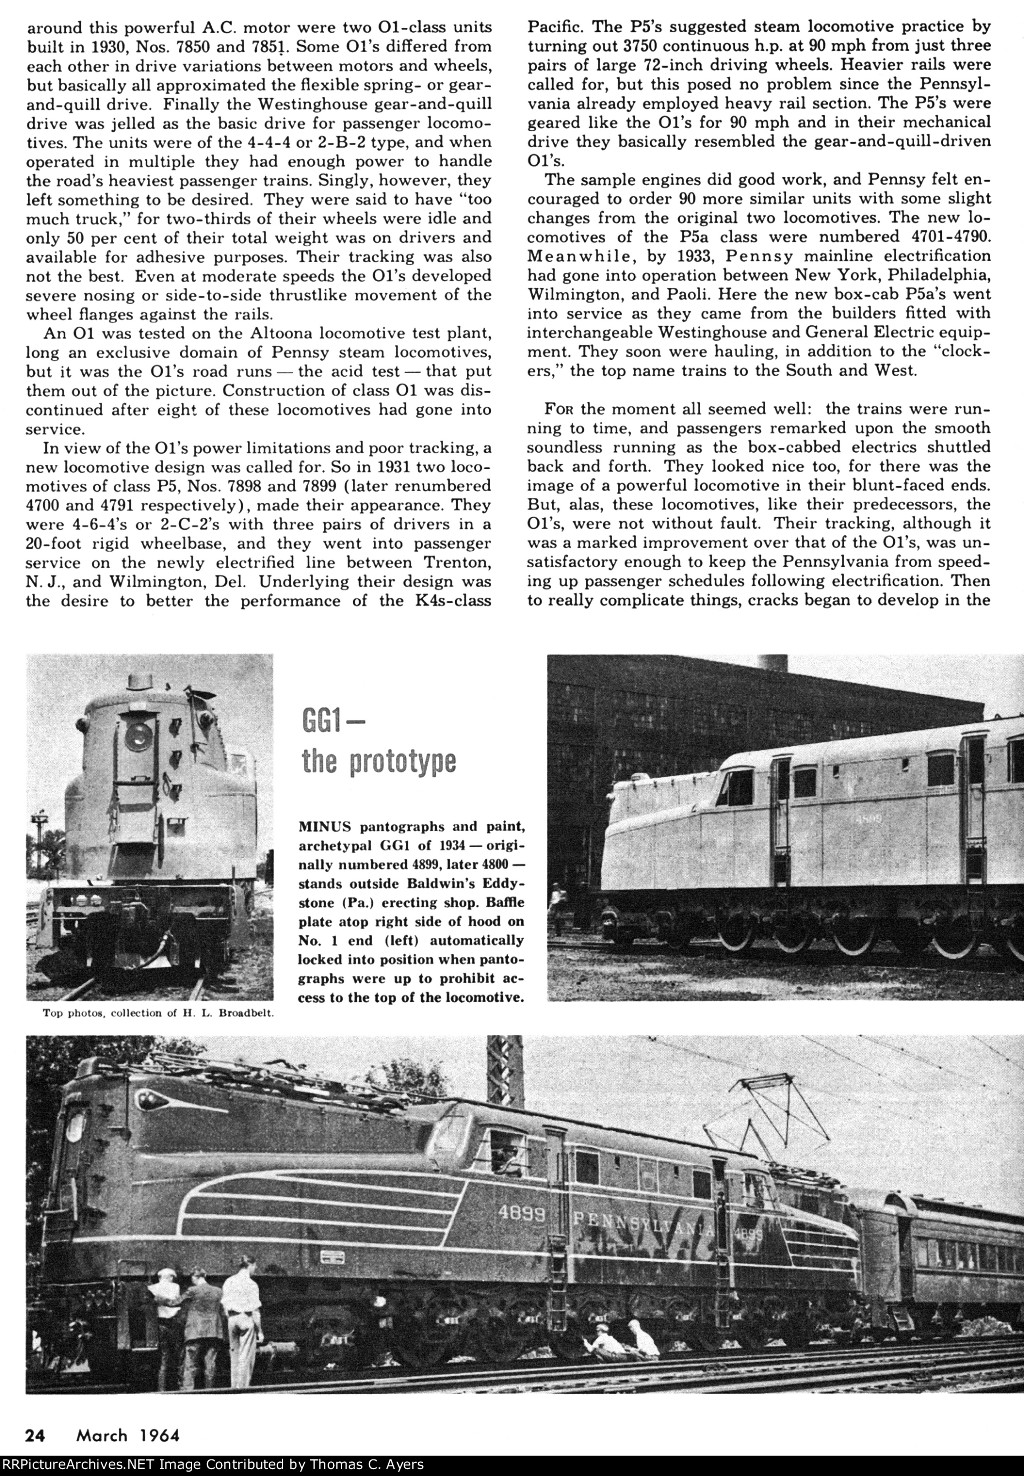 Story Of The GG-1, Page 24, 1964